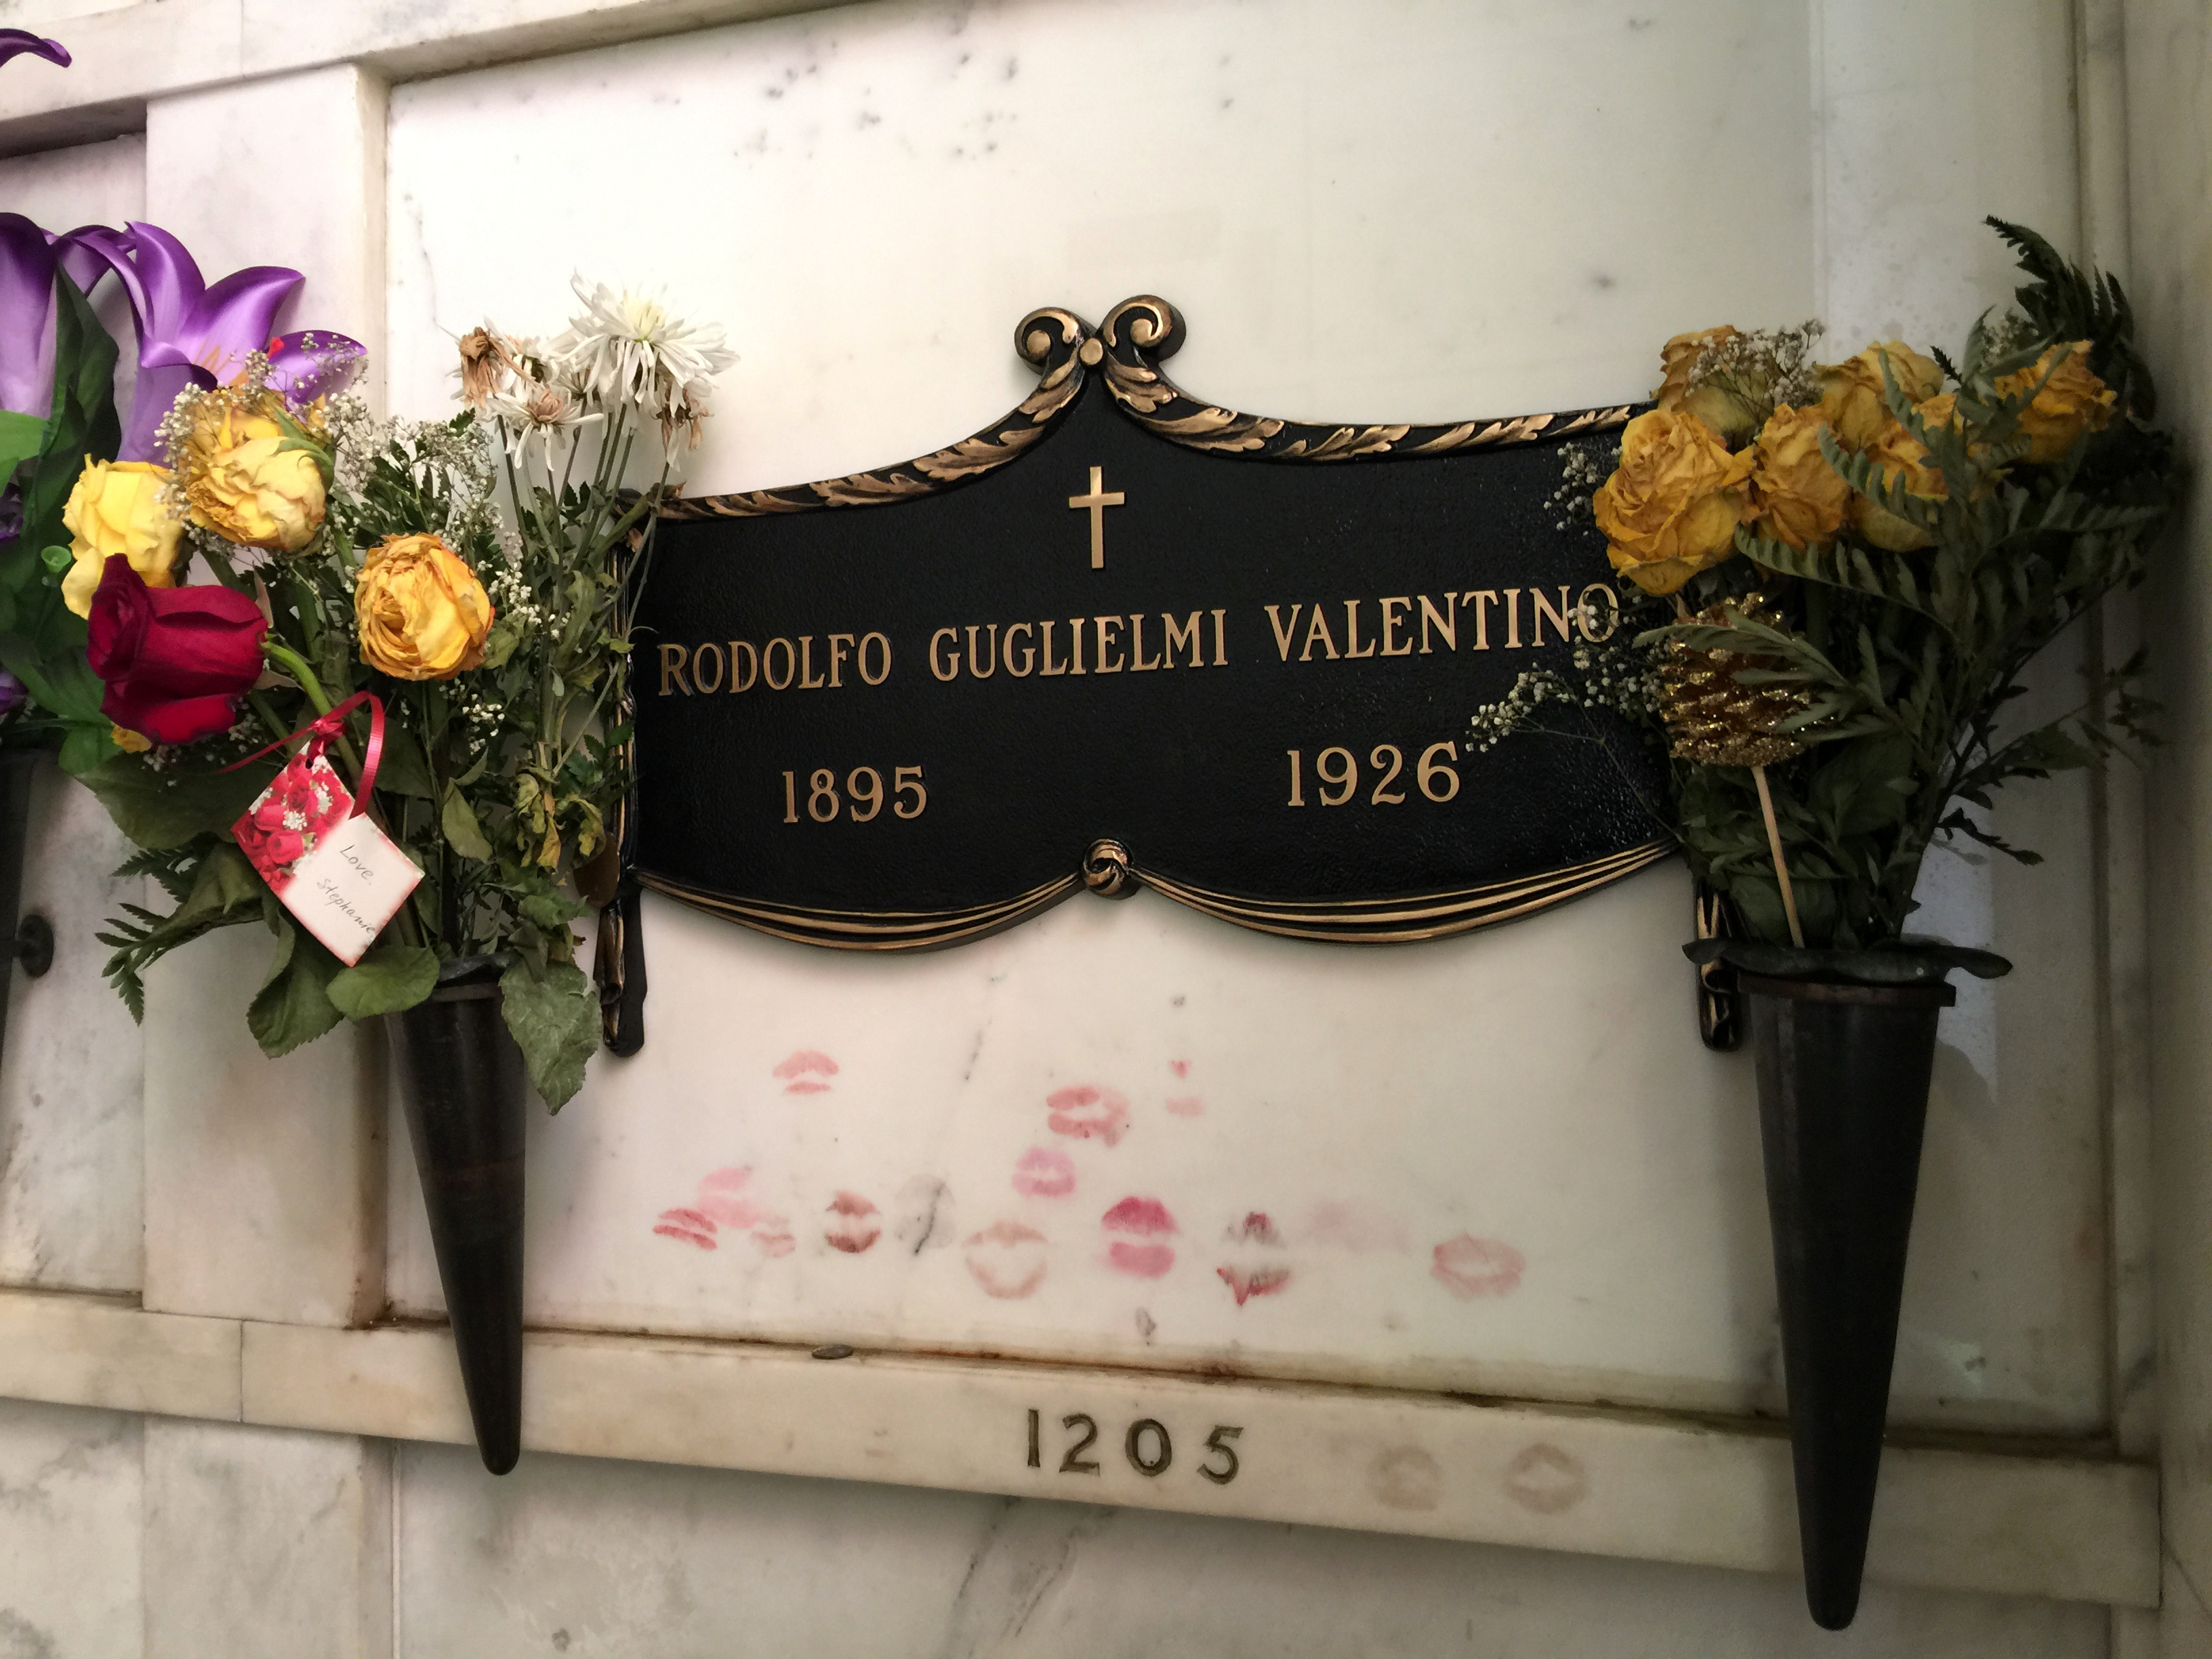 Silent film heart-throb Rudolph Valentino died young and is buried in the Hollywood Forever Cemetery. © Tim Richards / Lonely Planet